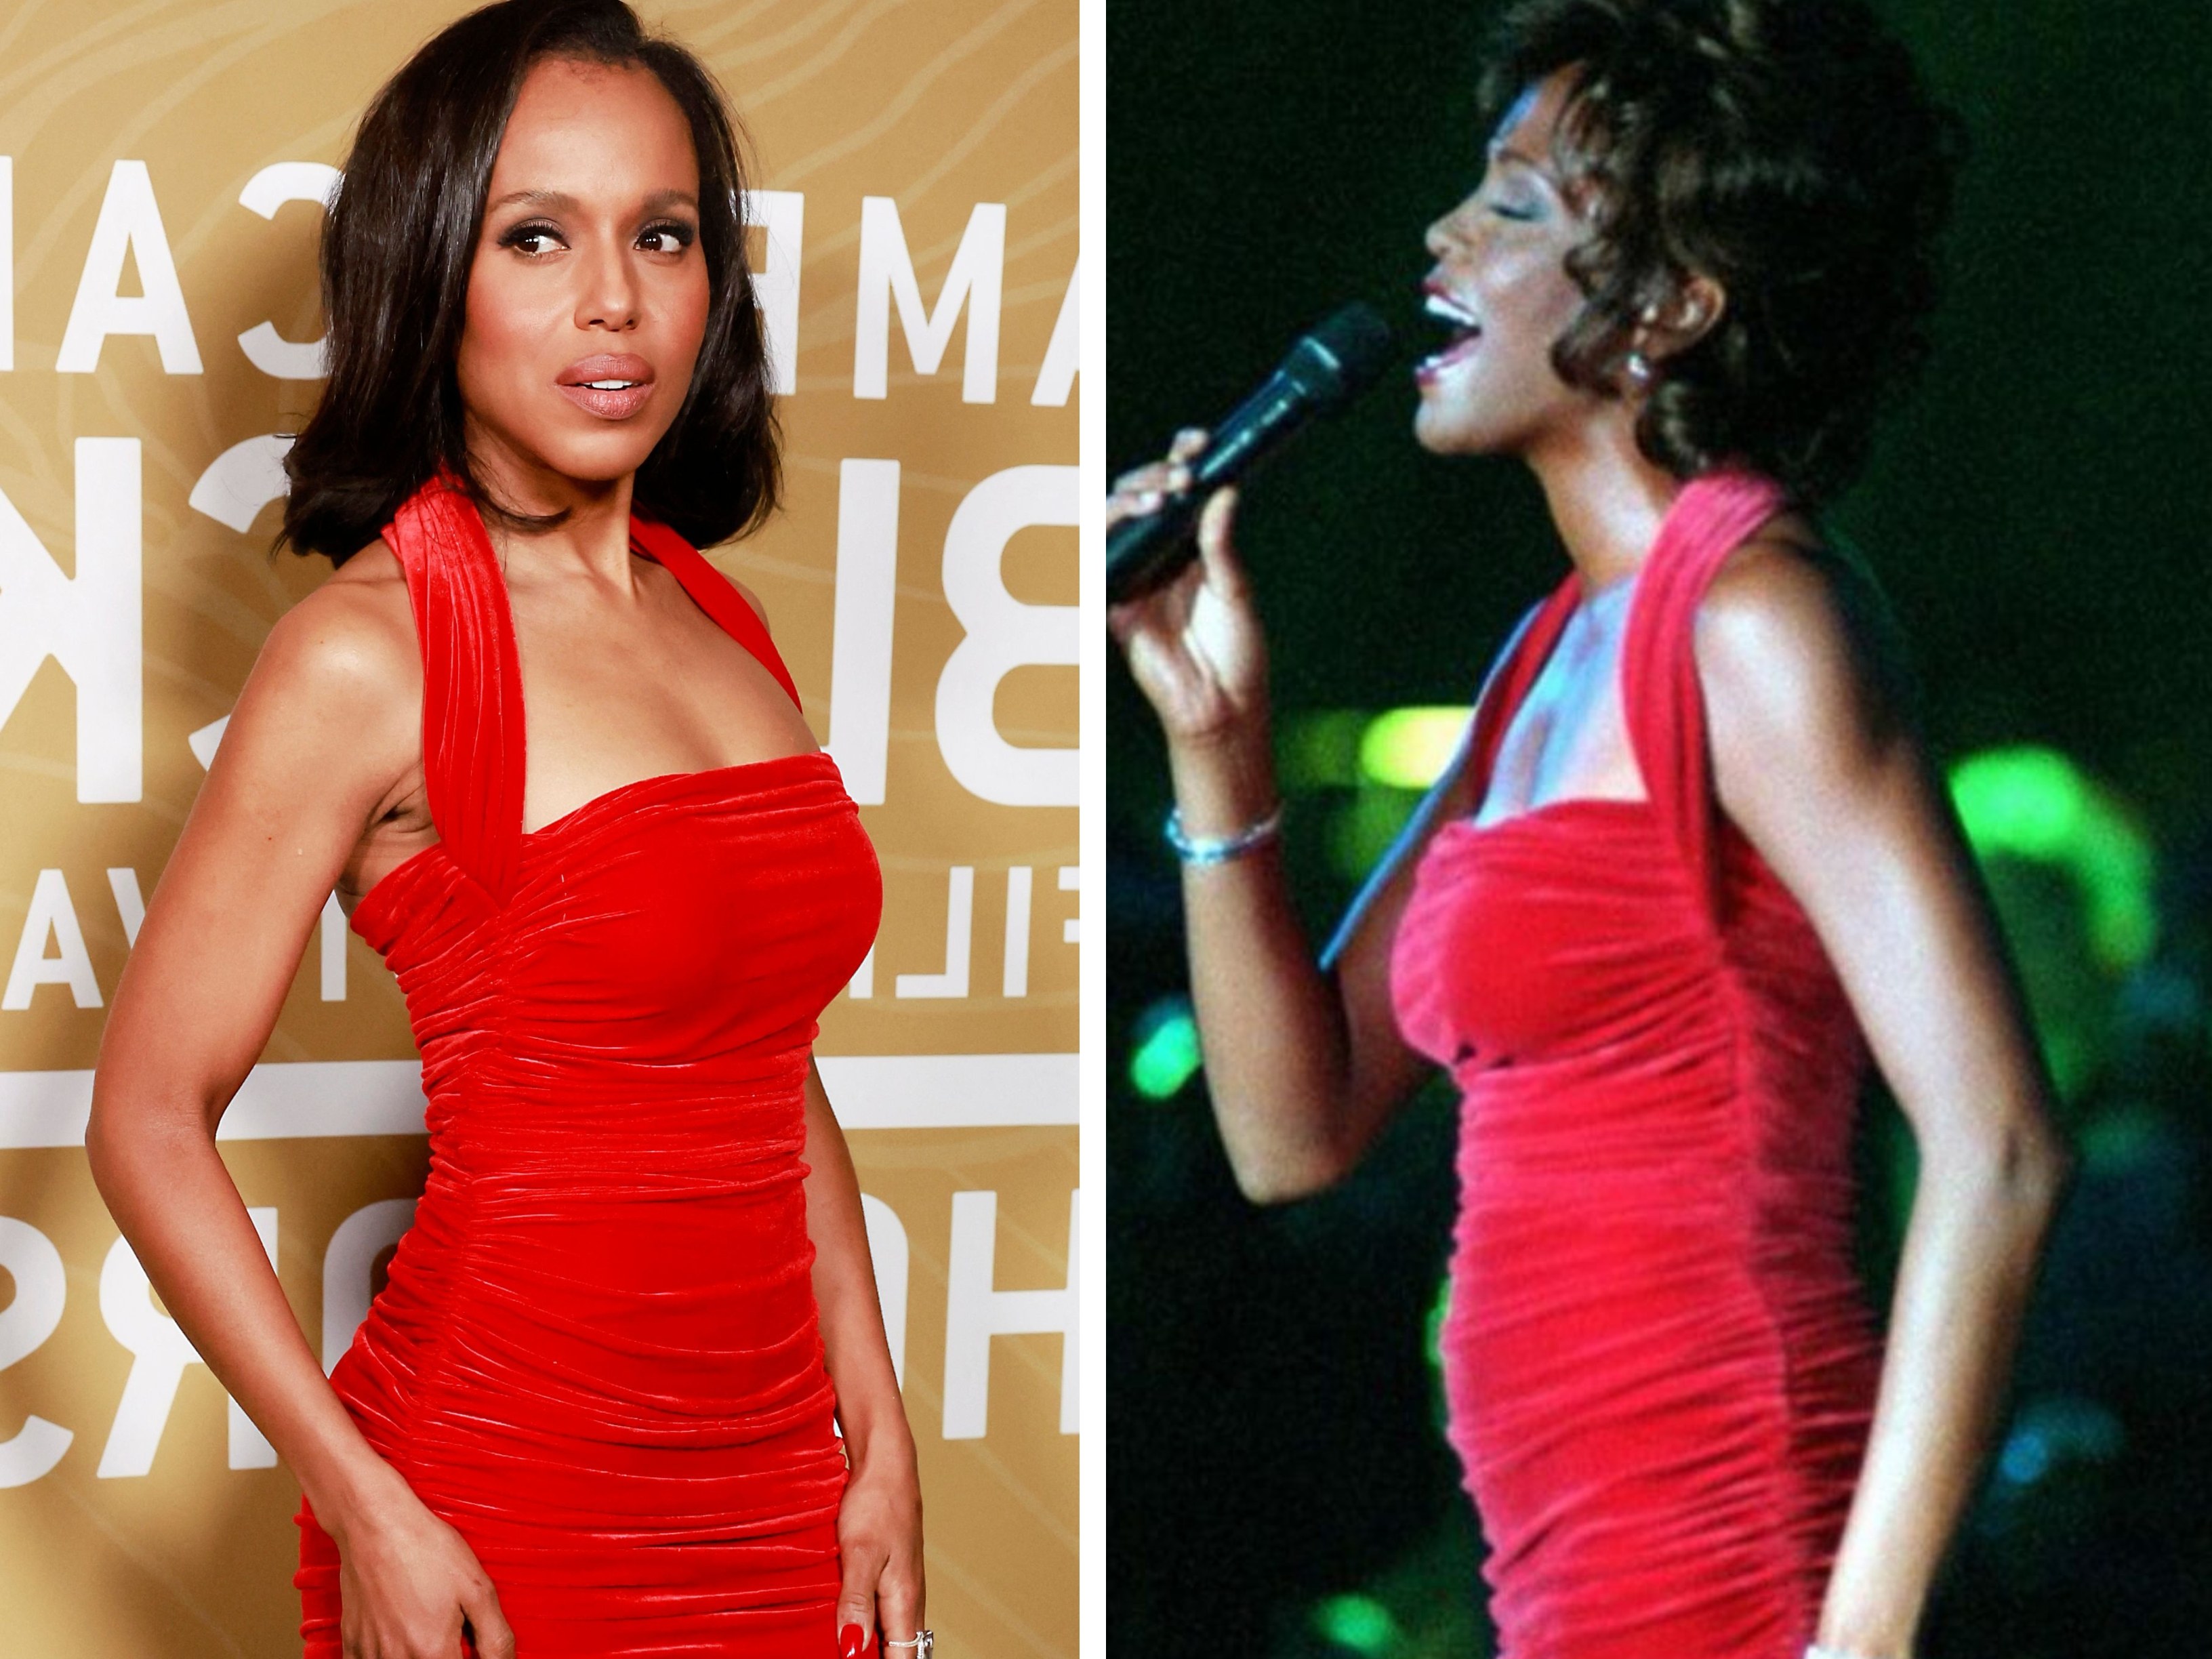 Celebs in Marc Jacobs Dresses: Kerry Washington, More